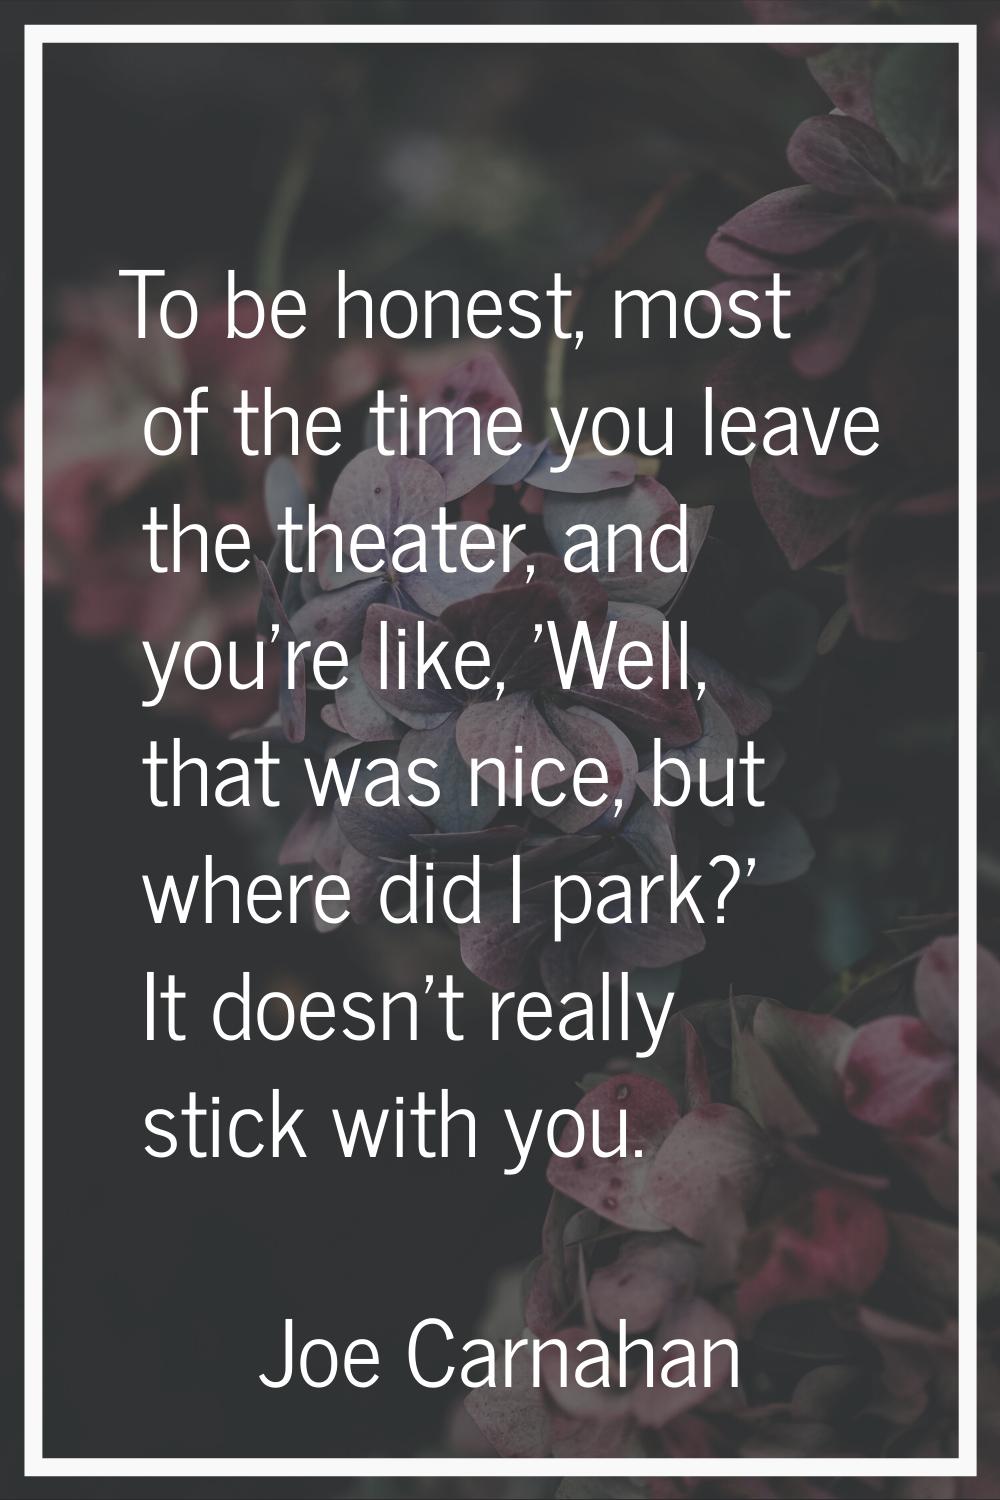 To be honest, most of the time you leave the theater, and you're like, 'Well, that was nice, but wh